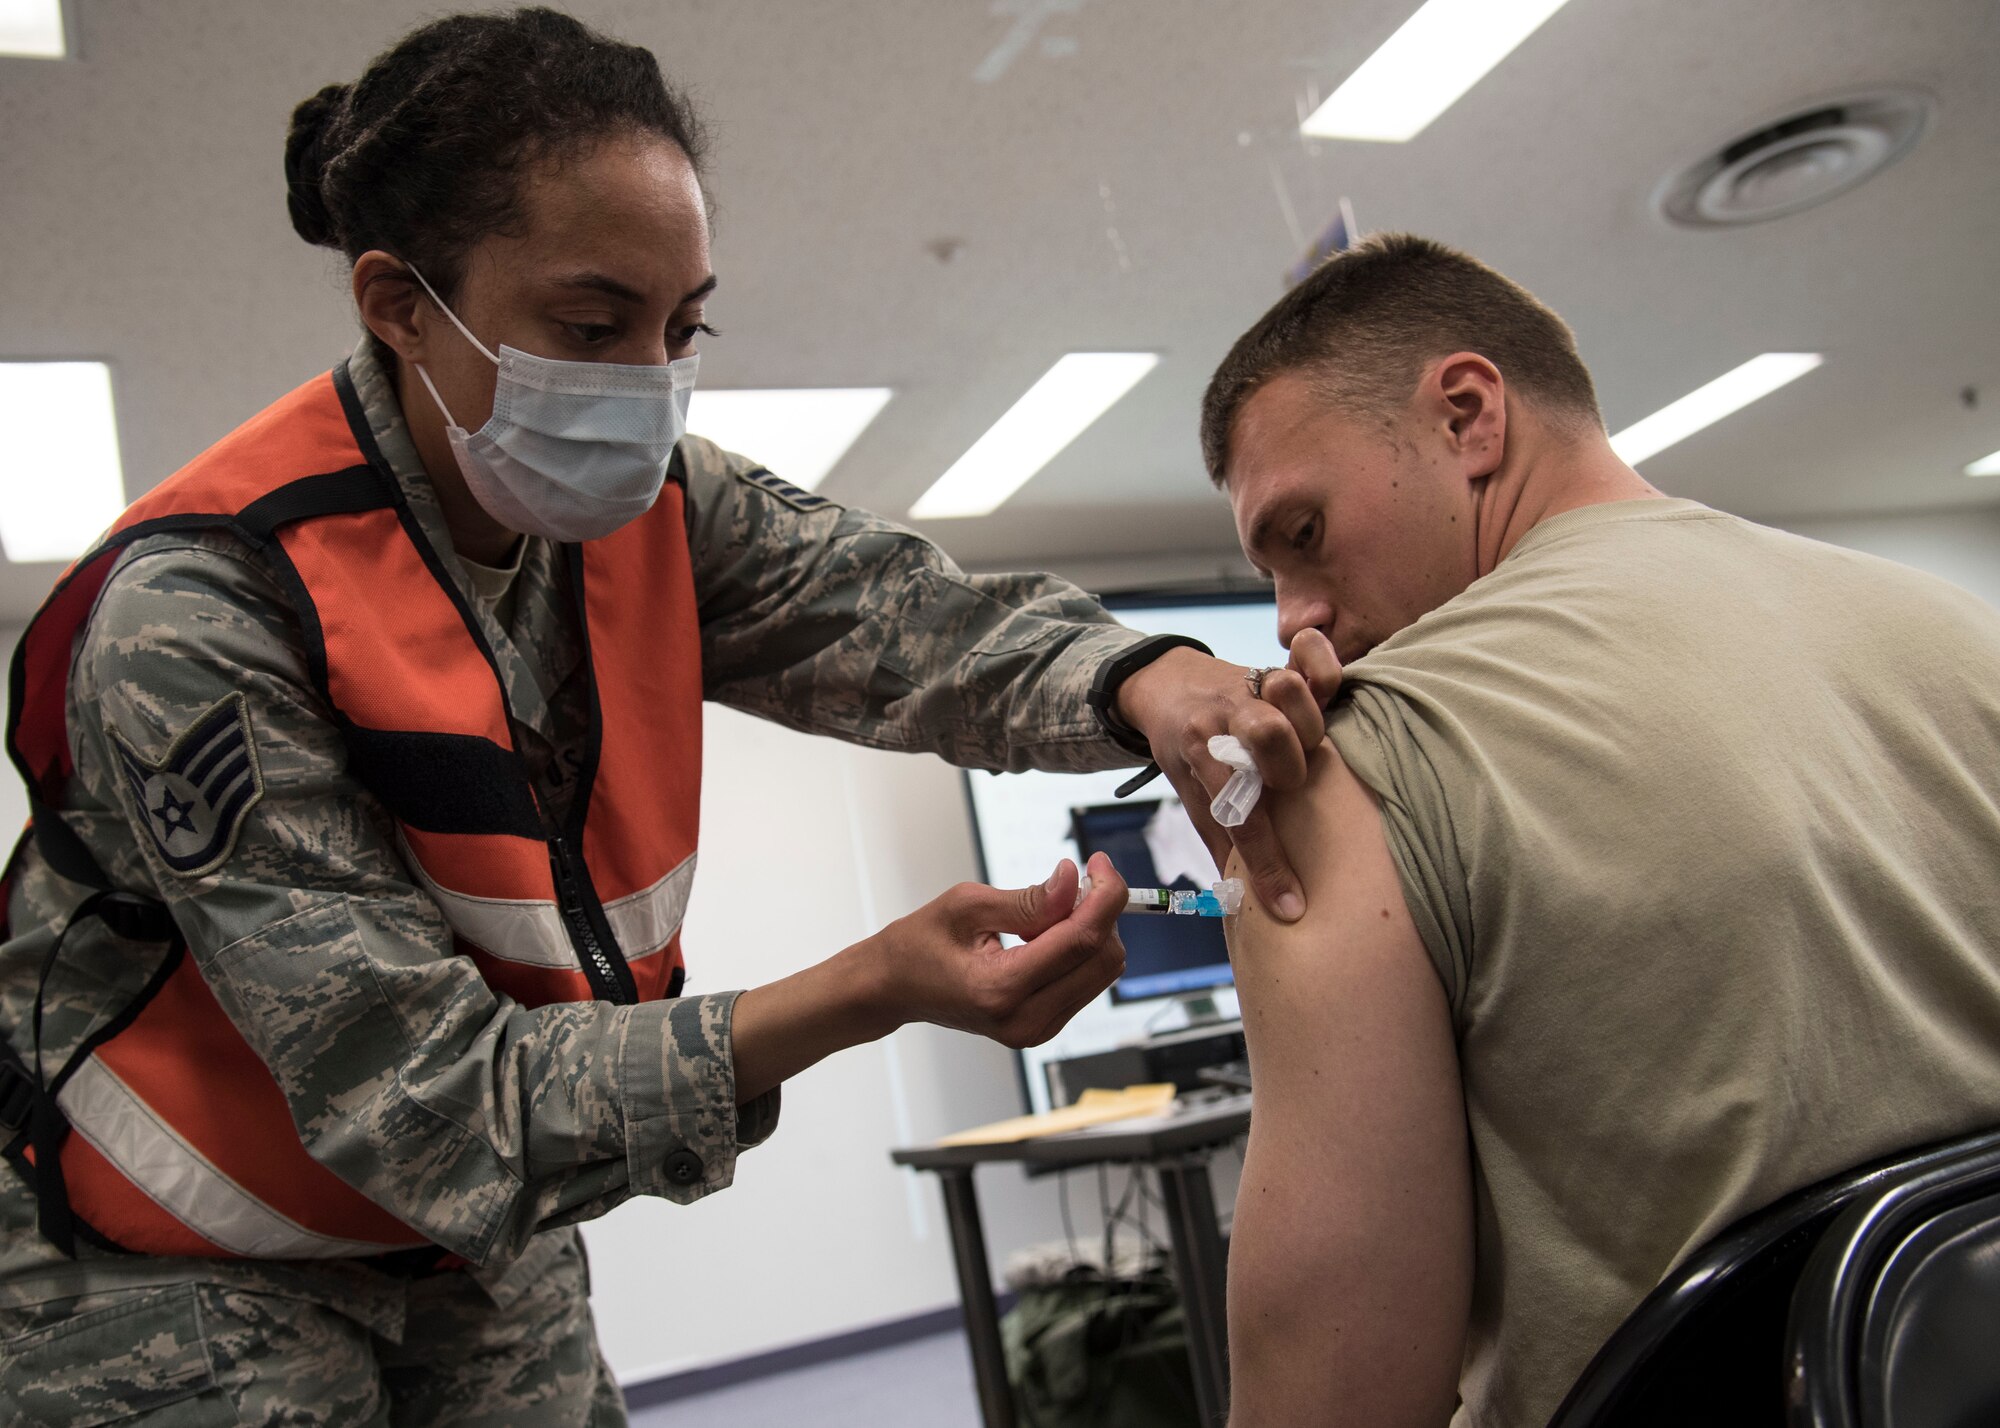 U.S. Air Force Staff Sgt. Cherie Gregory, the allergy immunizations NCO in charge with the 35th Medical Operations Squadron, administers a vaccine at Misawa Air Base, Japan, March 15, 2016. While taking part in Beverly Sunrise 16-03, an operational readiness exercise, Airmen attended a mock Personnel Deployment Function ensuring their medical records were up-to-date. Personnel who were due for vaccinations were received them before the mock departure. (U.S. Air Force photo by Airman 1st Class Jordyn Fetter)